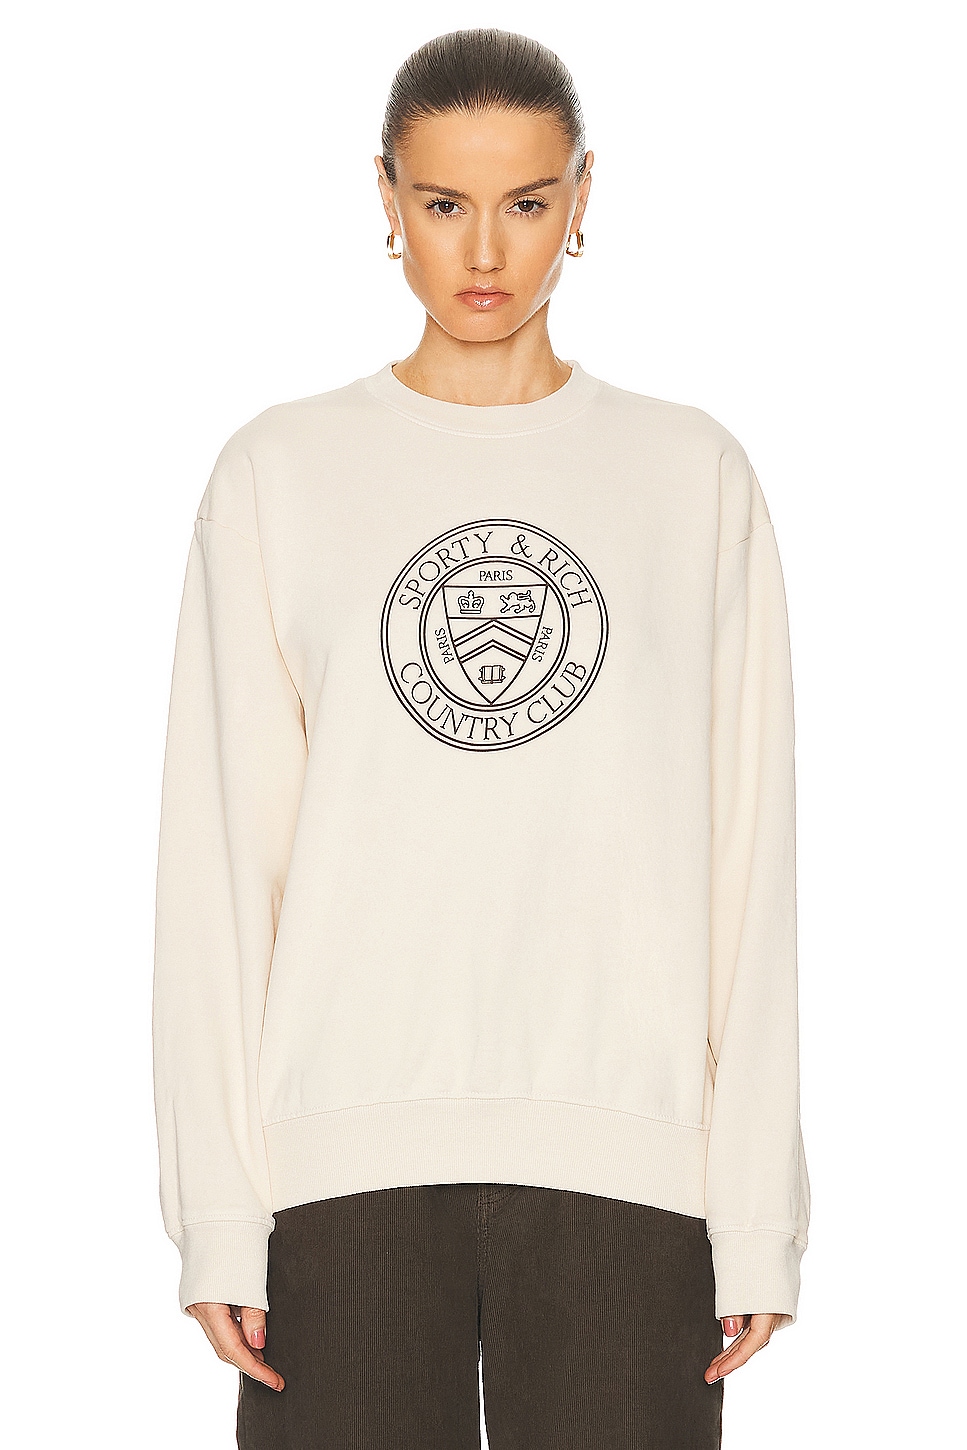 Image 1 of Sporty & Rich Connecticut Crest Crewneck Sweater in Cream